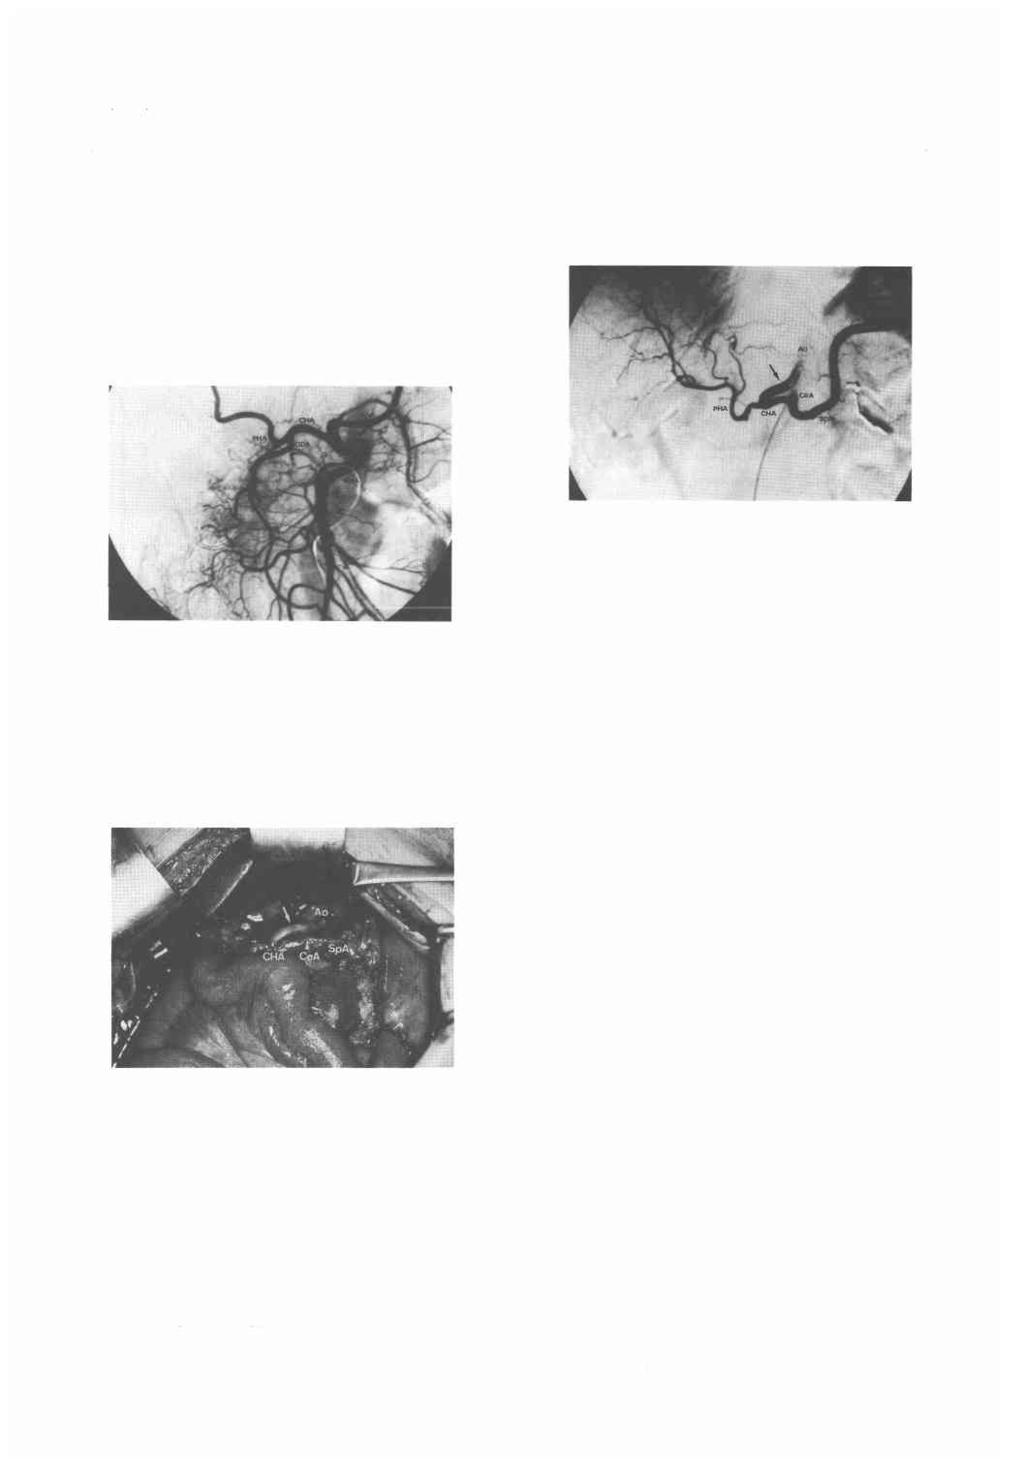 Fig. 4 Superior mesenteric angiogram demonstrates high-grade stenosis of the celiac axis at its origin and the blood supply to the celiac artery being sustained through the gastroduodenal artery via